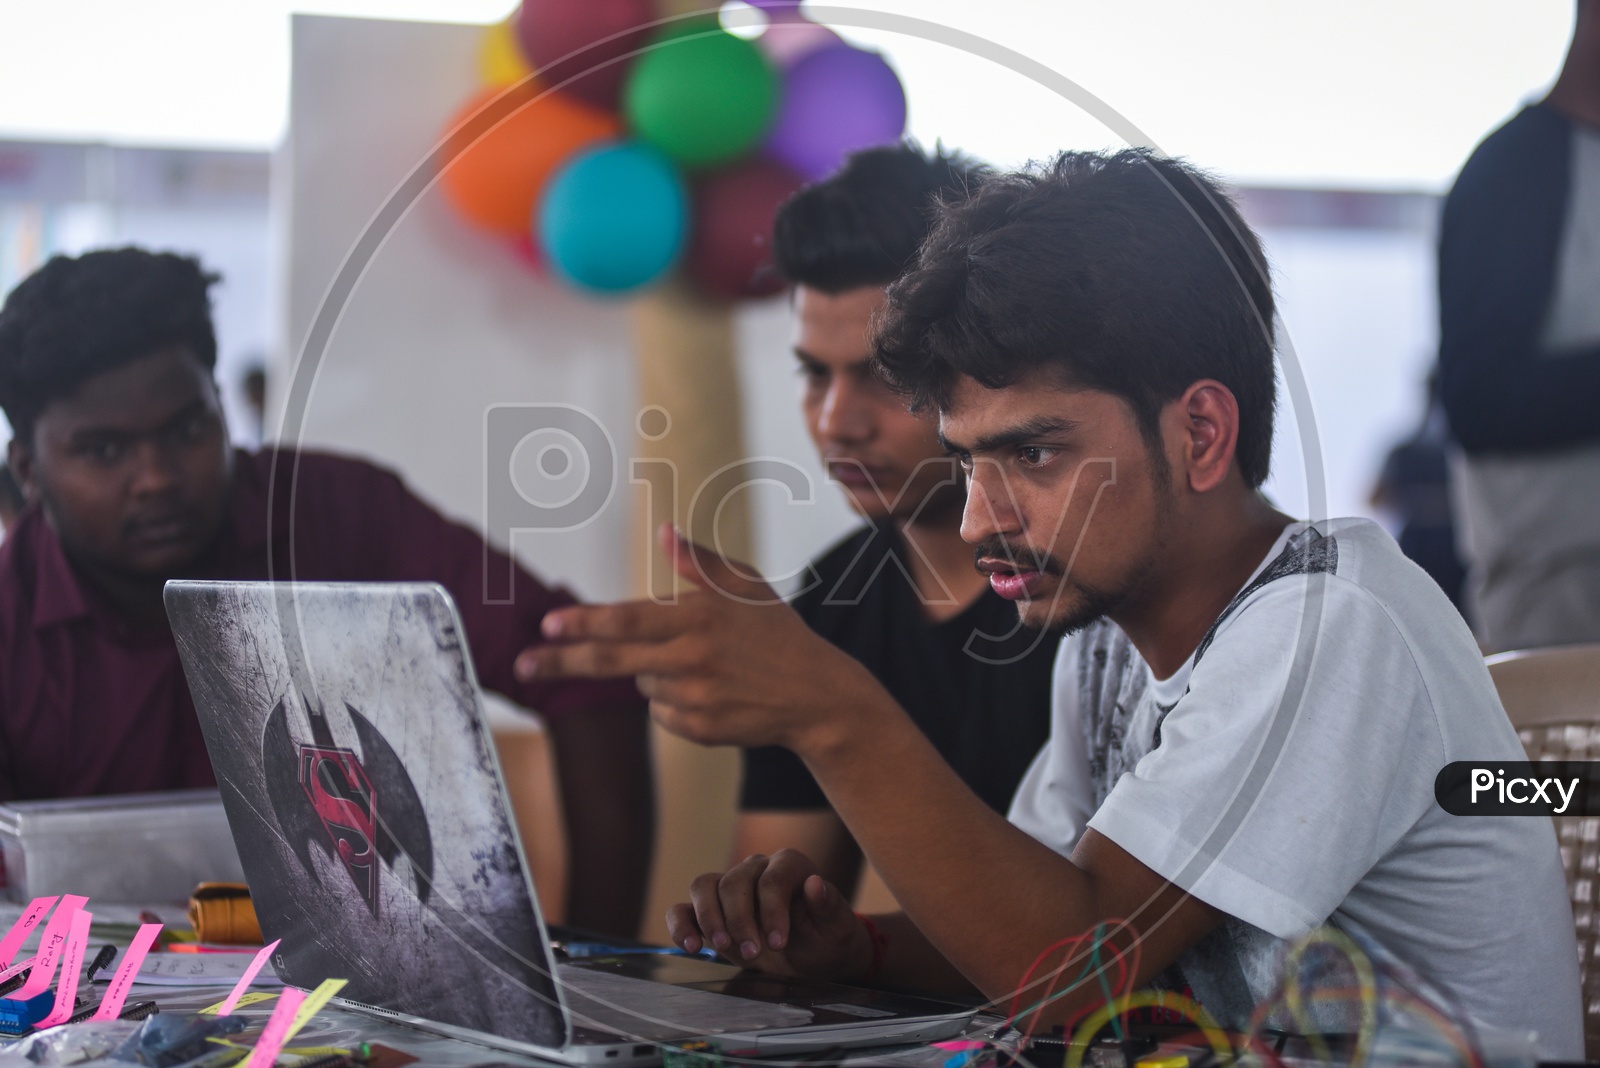 A student looking into a Laptop